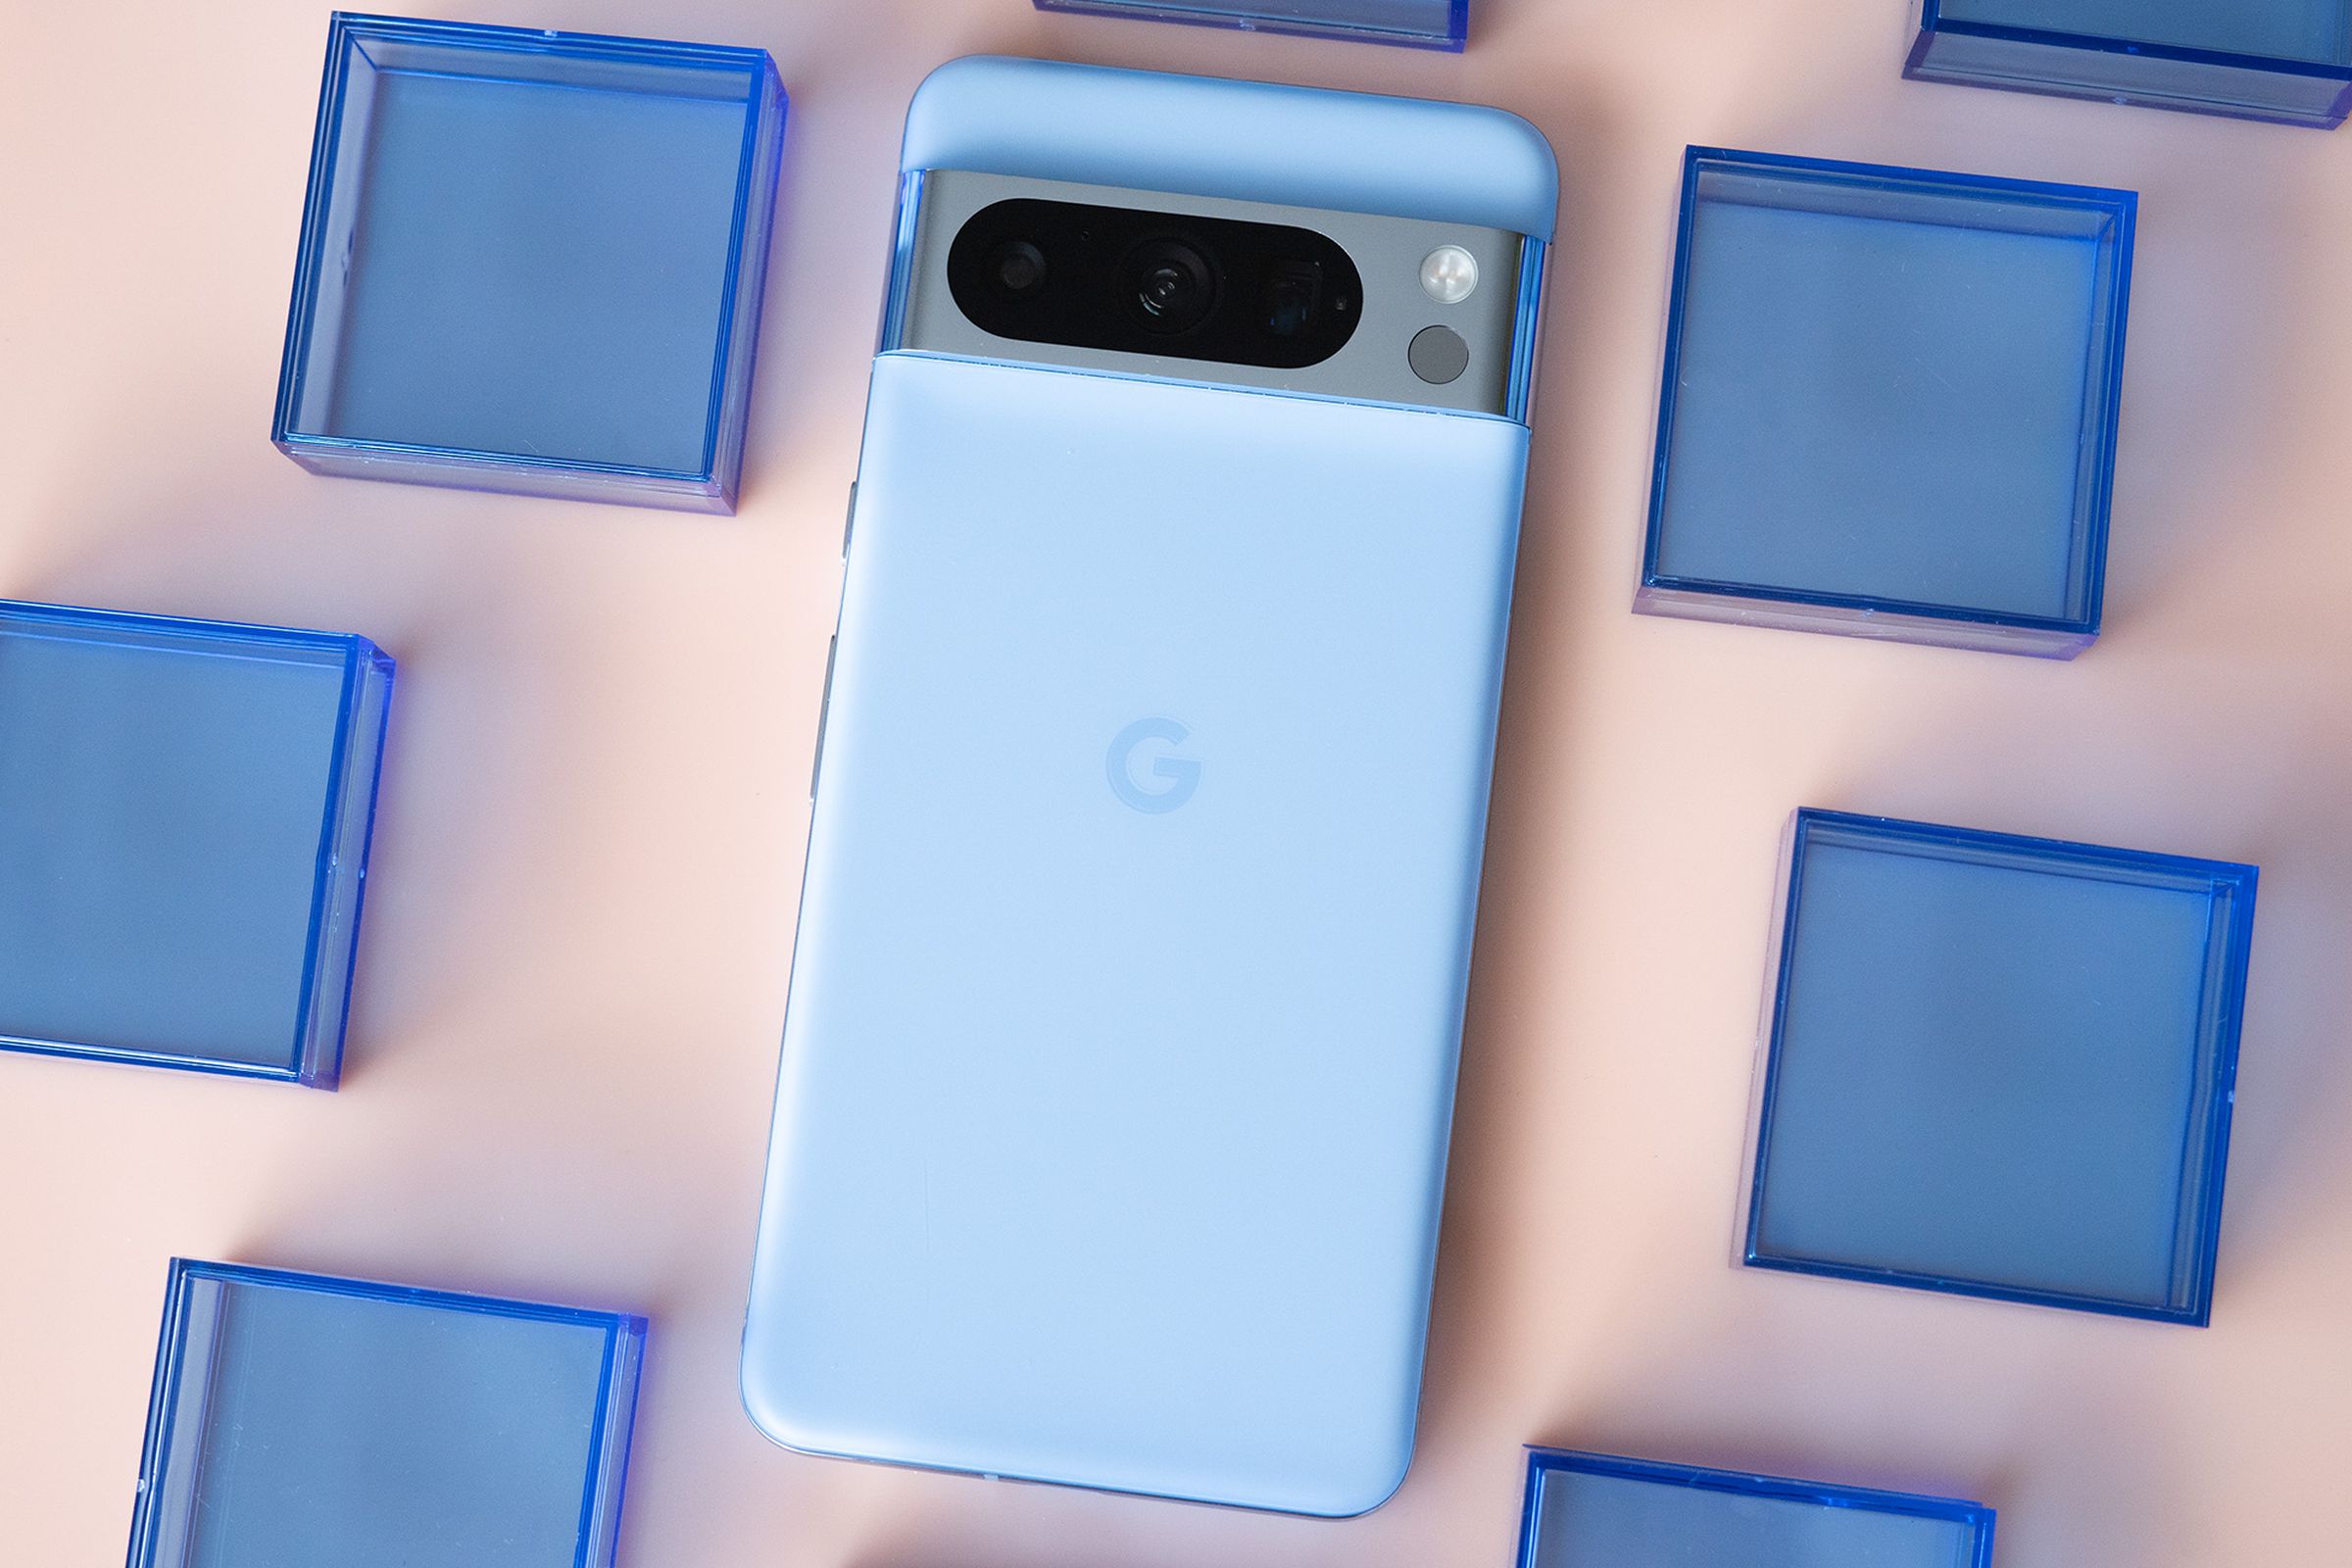 Google Pixel 8 Pro in bay blue on a light pink background surrounded by blue plastic squares